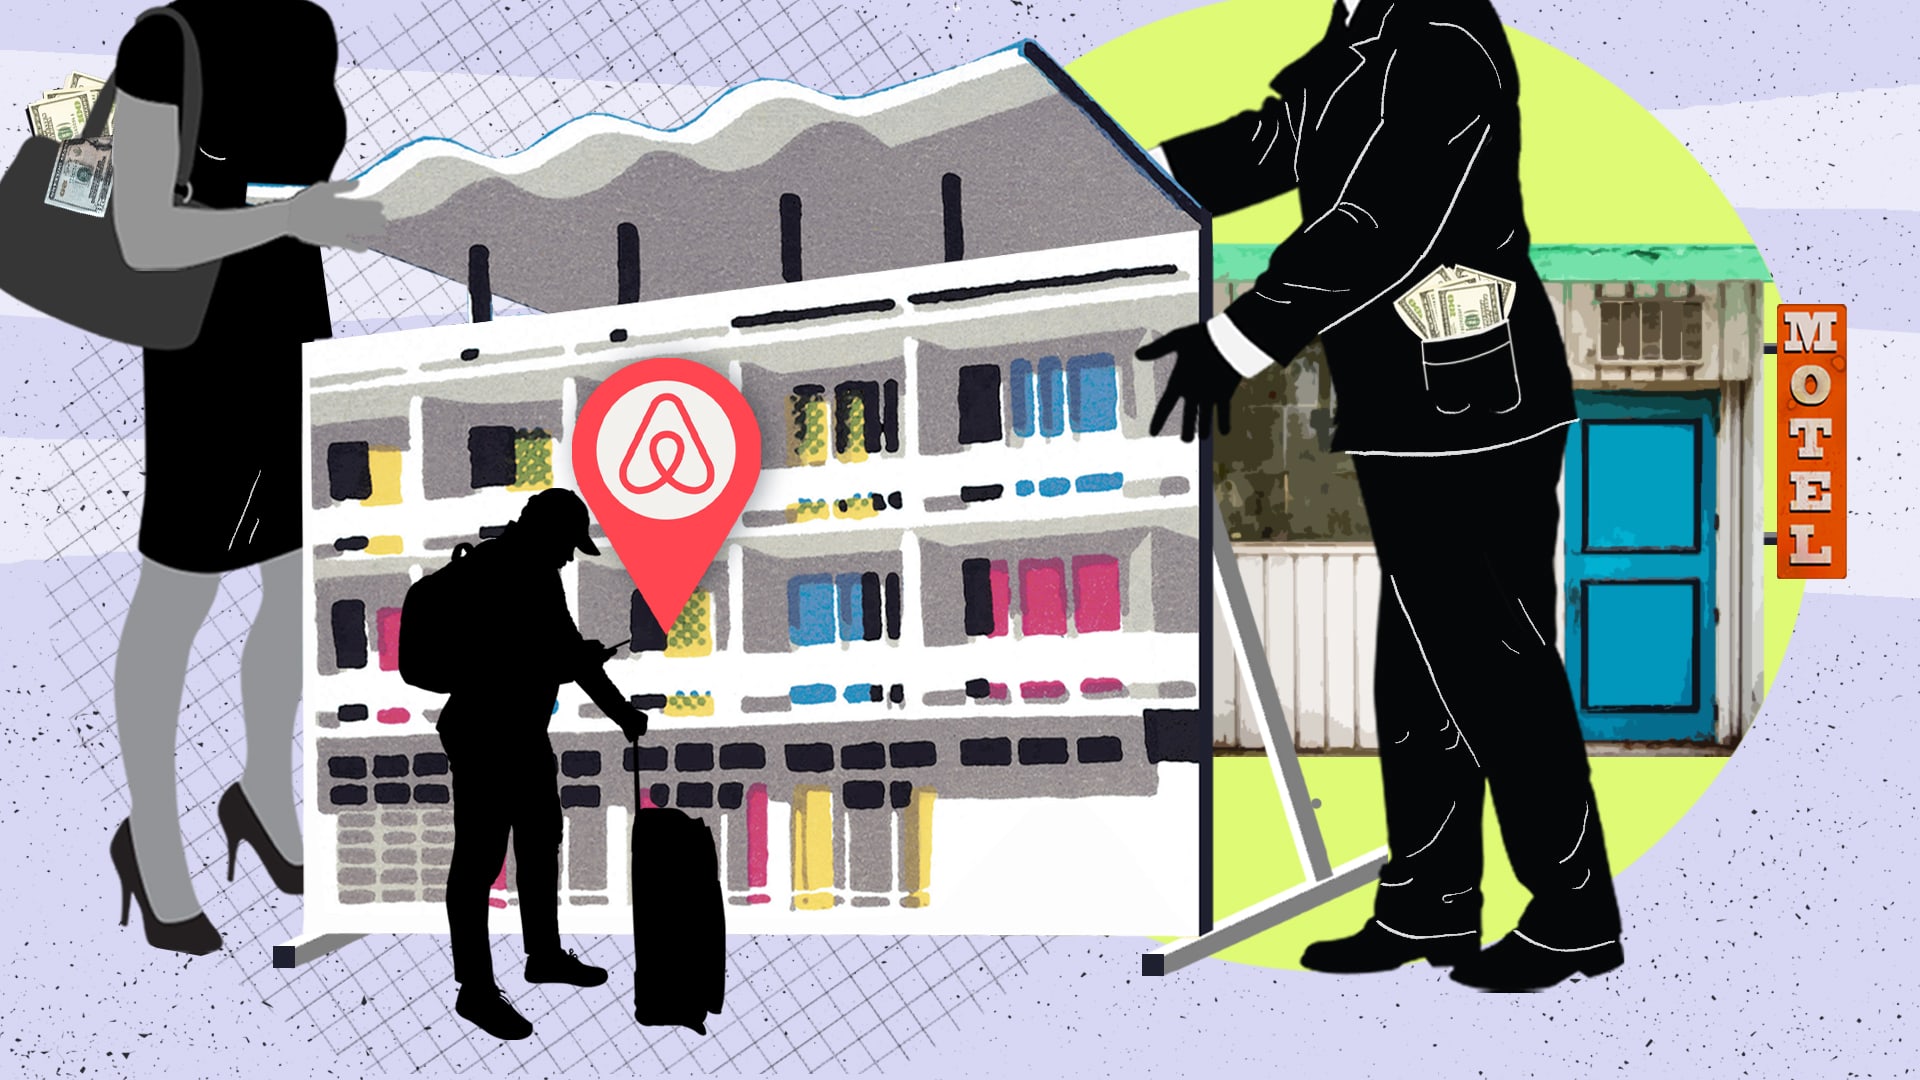 Investors in Airbnb arbitrage business allege they were defrauded in scheme promising 'higher returns than the stock market'